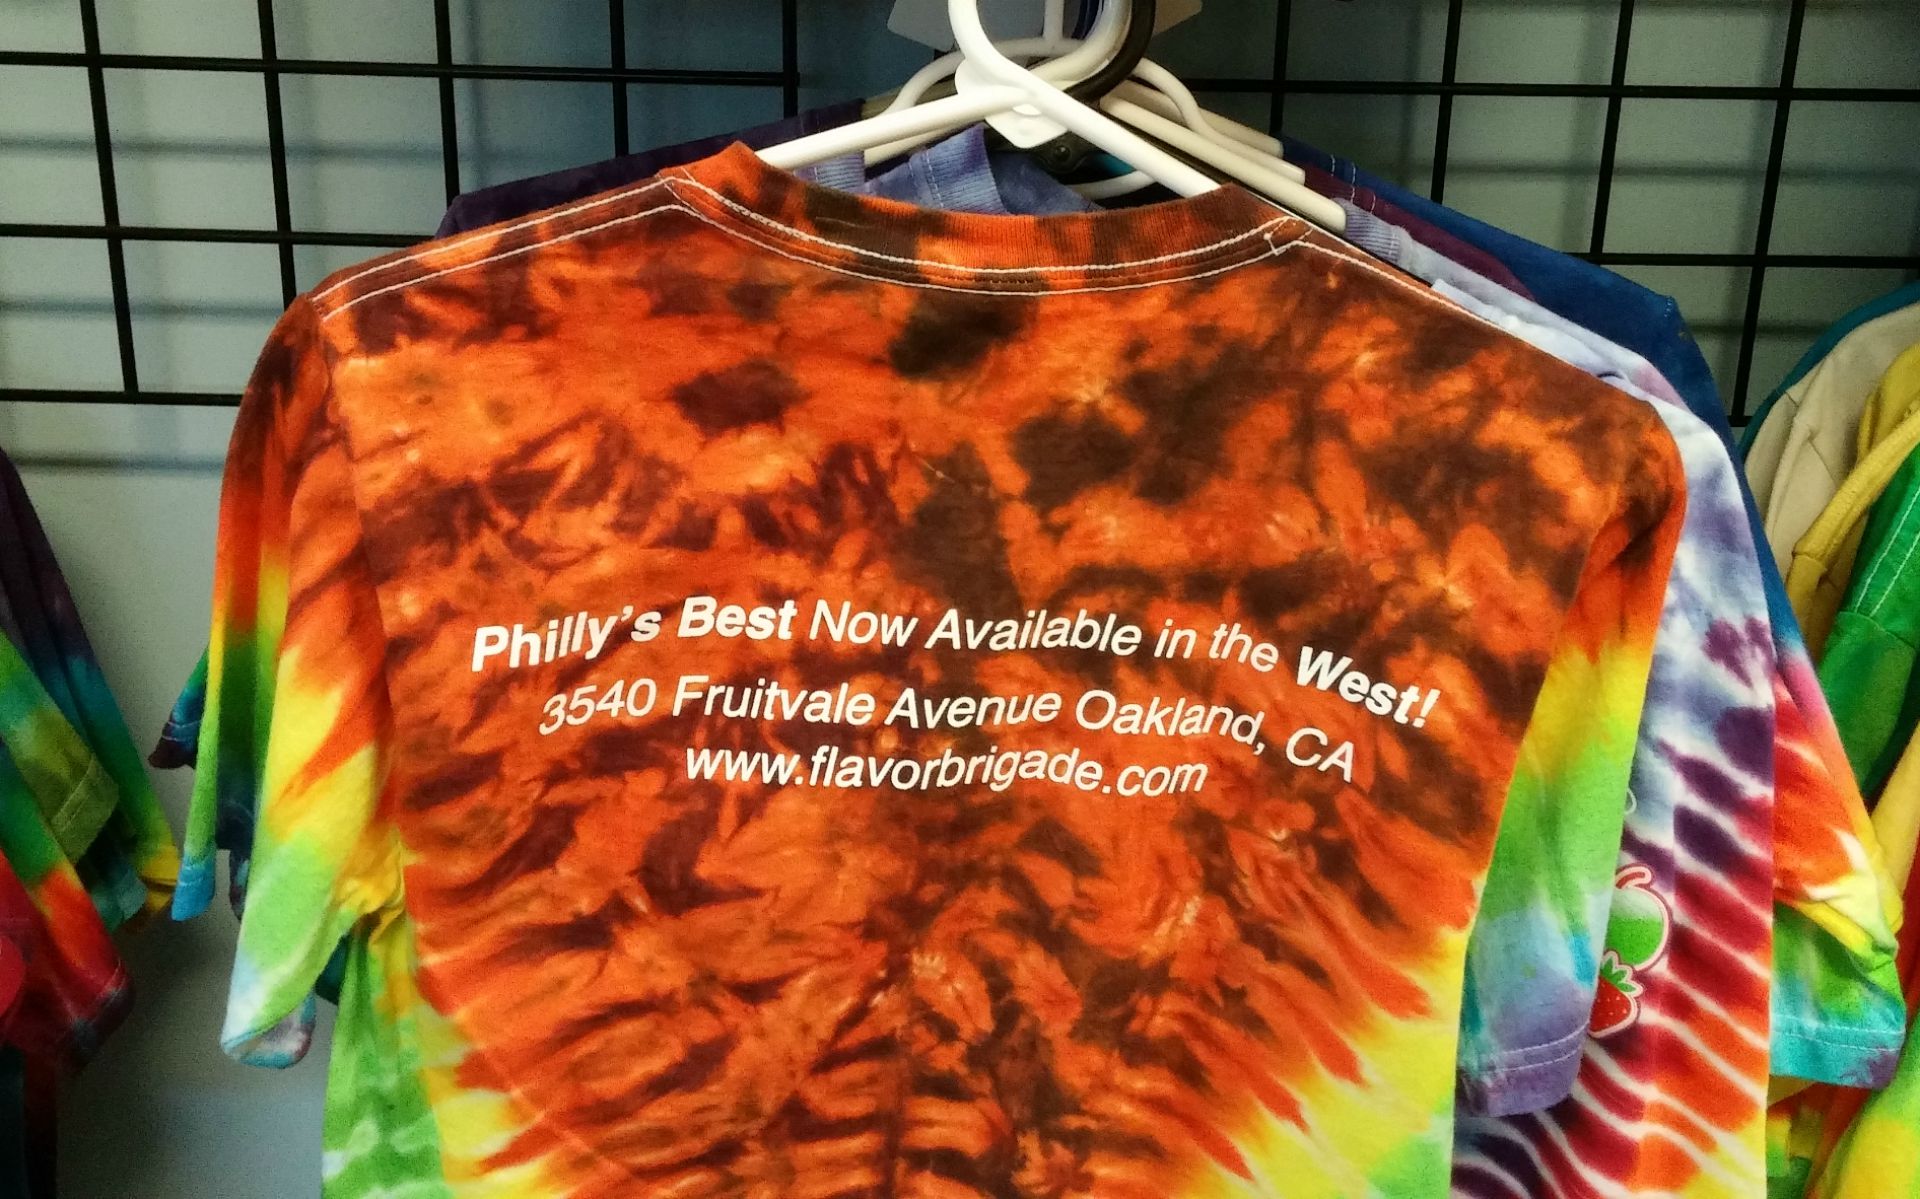 Flavor Brigade's slogan: "Philly's Best Now Available in the West"